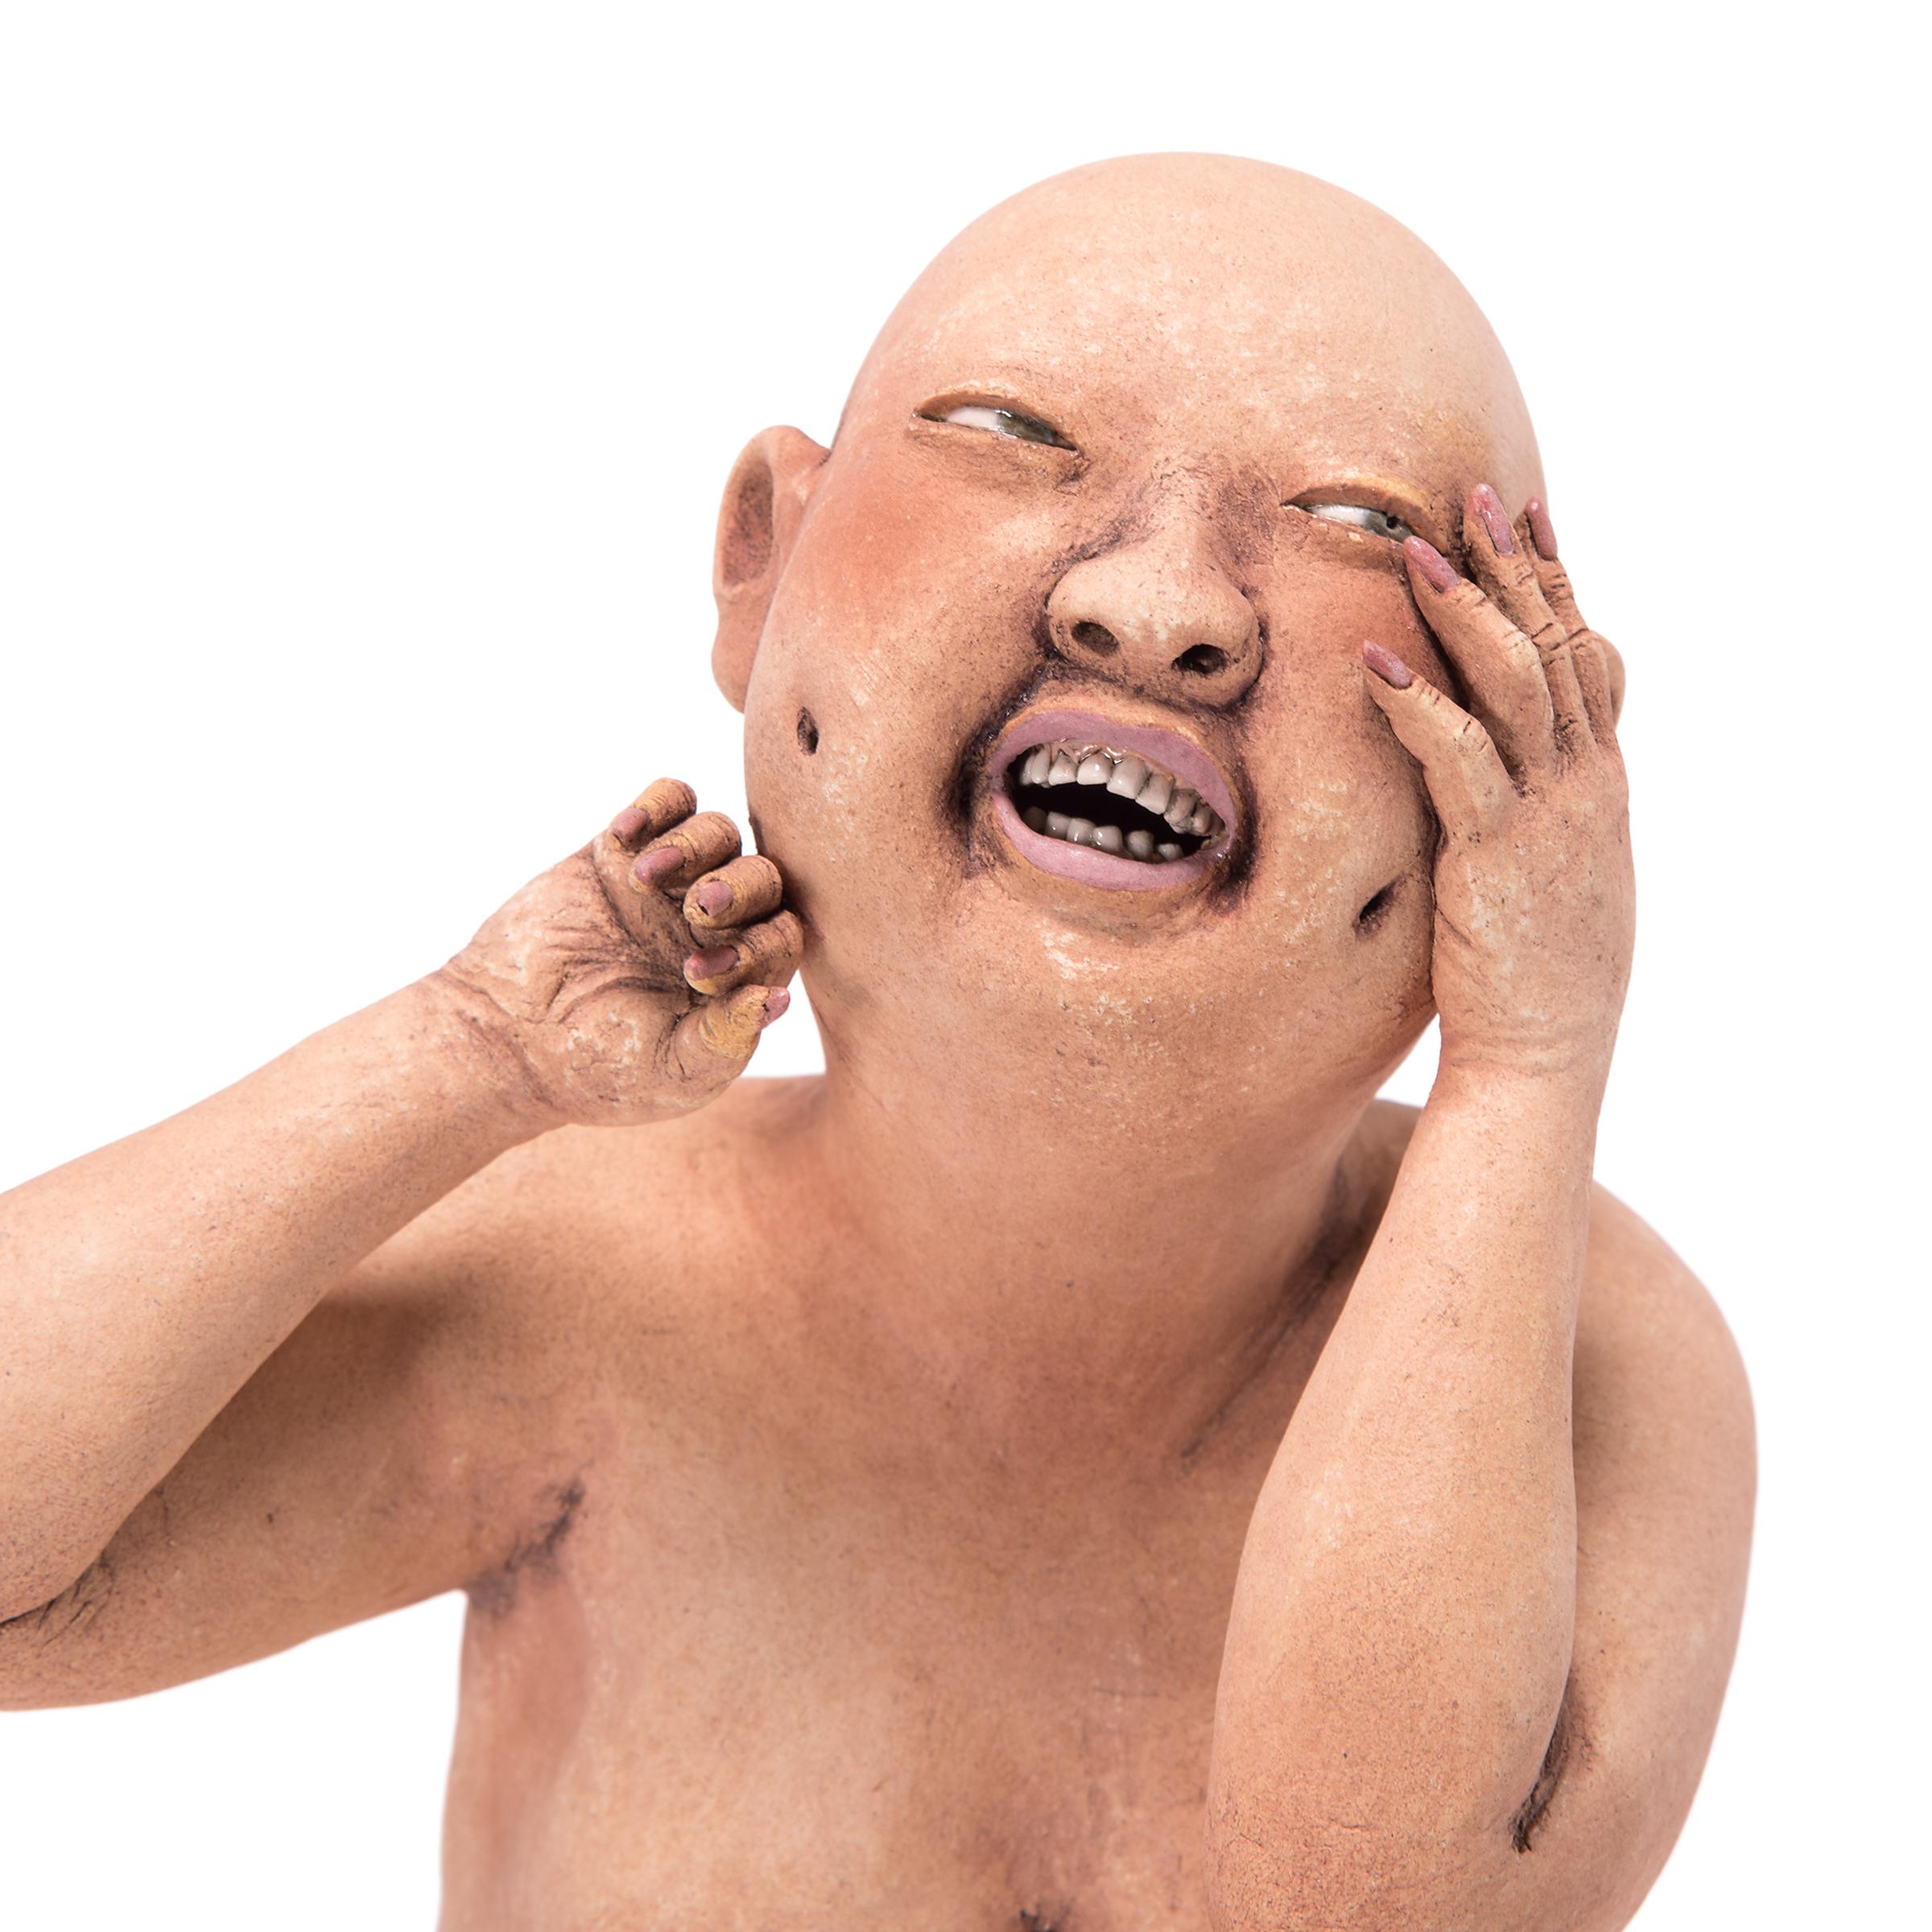 Bald and chunky, Esther Shimazu’s quirky clay figures are unabashedly naked and delightfully indulgent. Drawing up on her Japanese ancestry and experience living in a laid-back Asian community in Hawaii, the artist imbues her figures with a